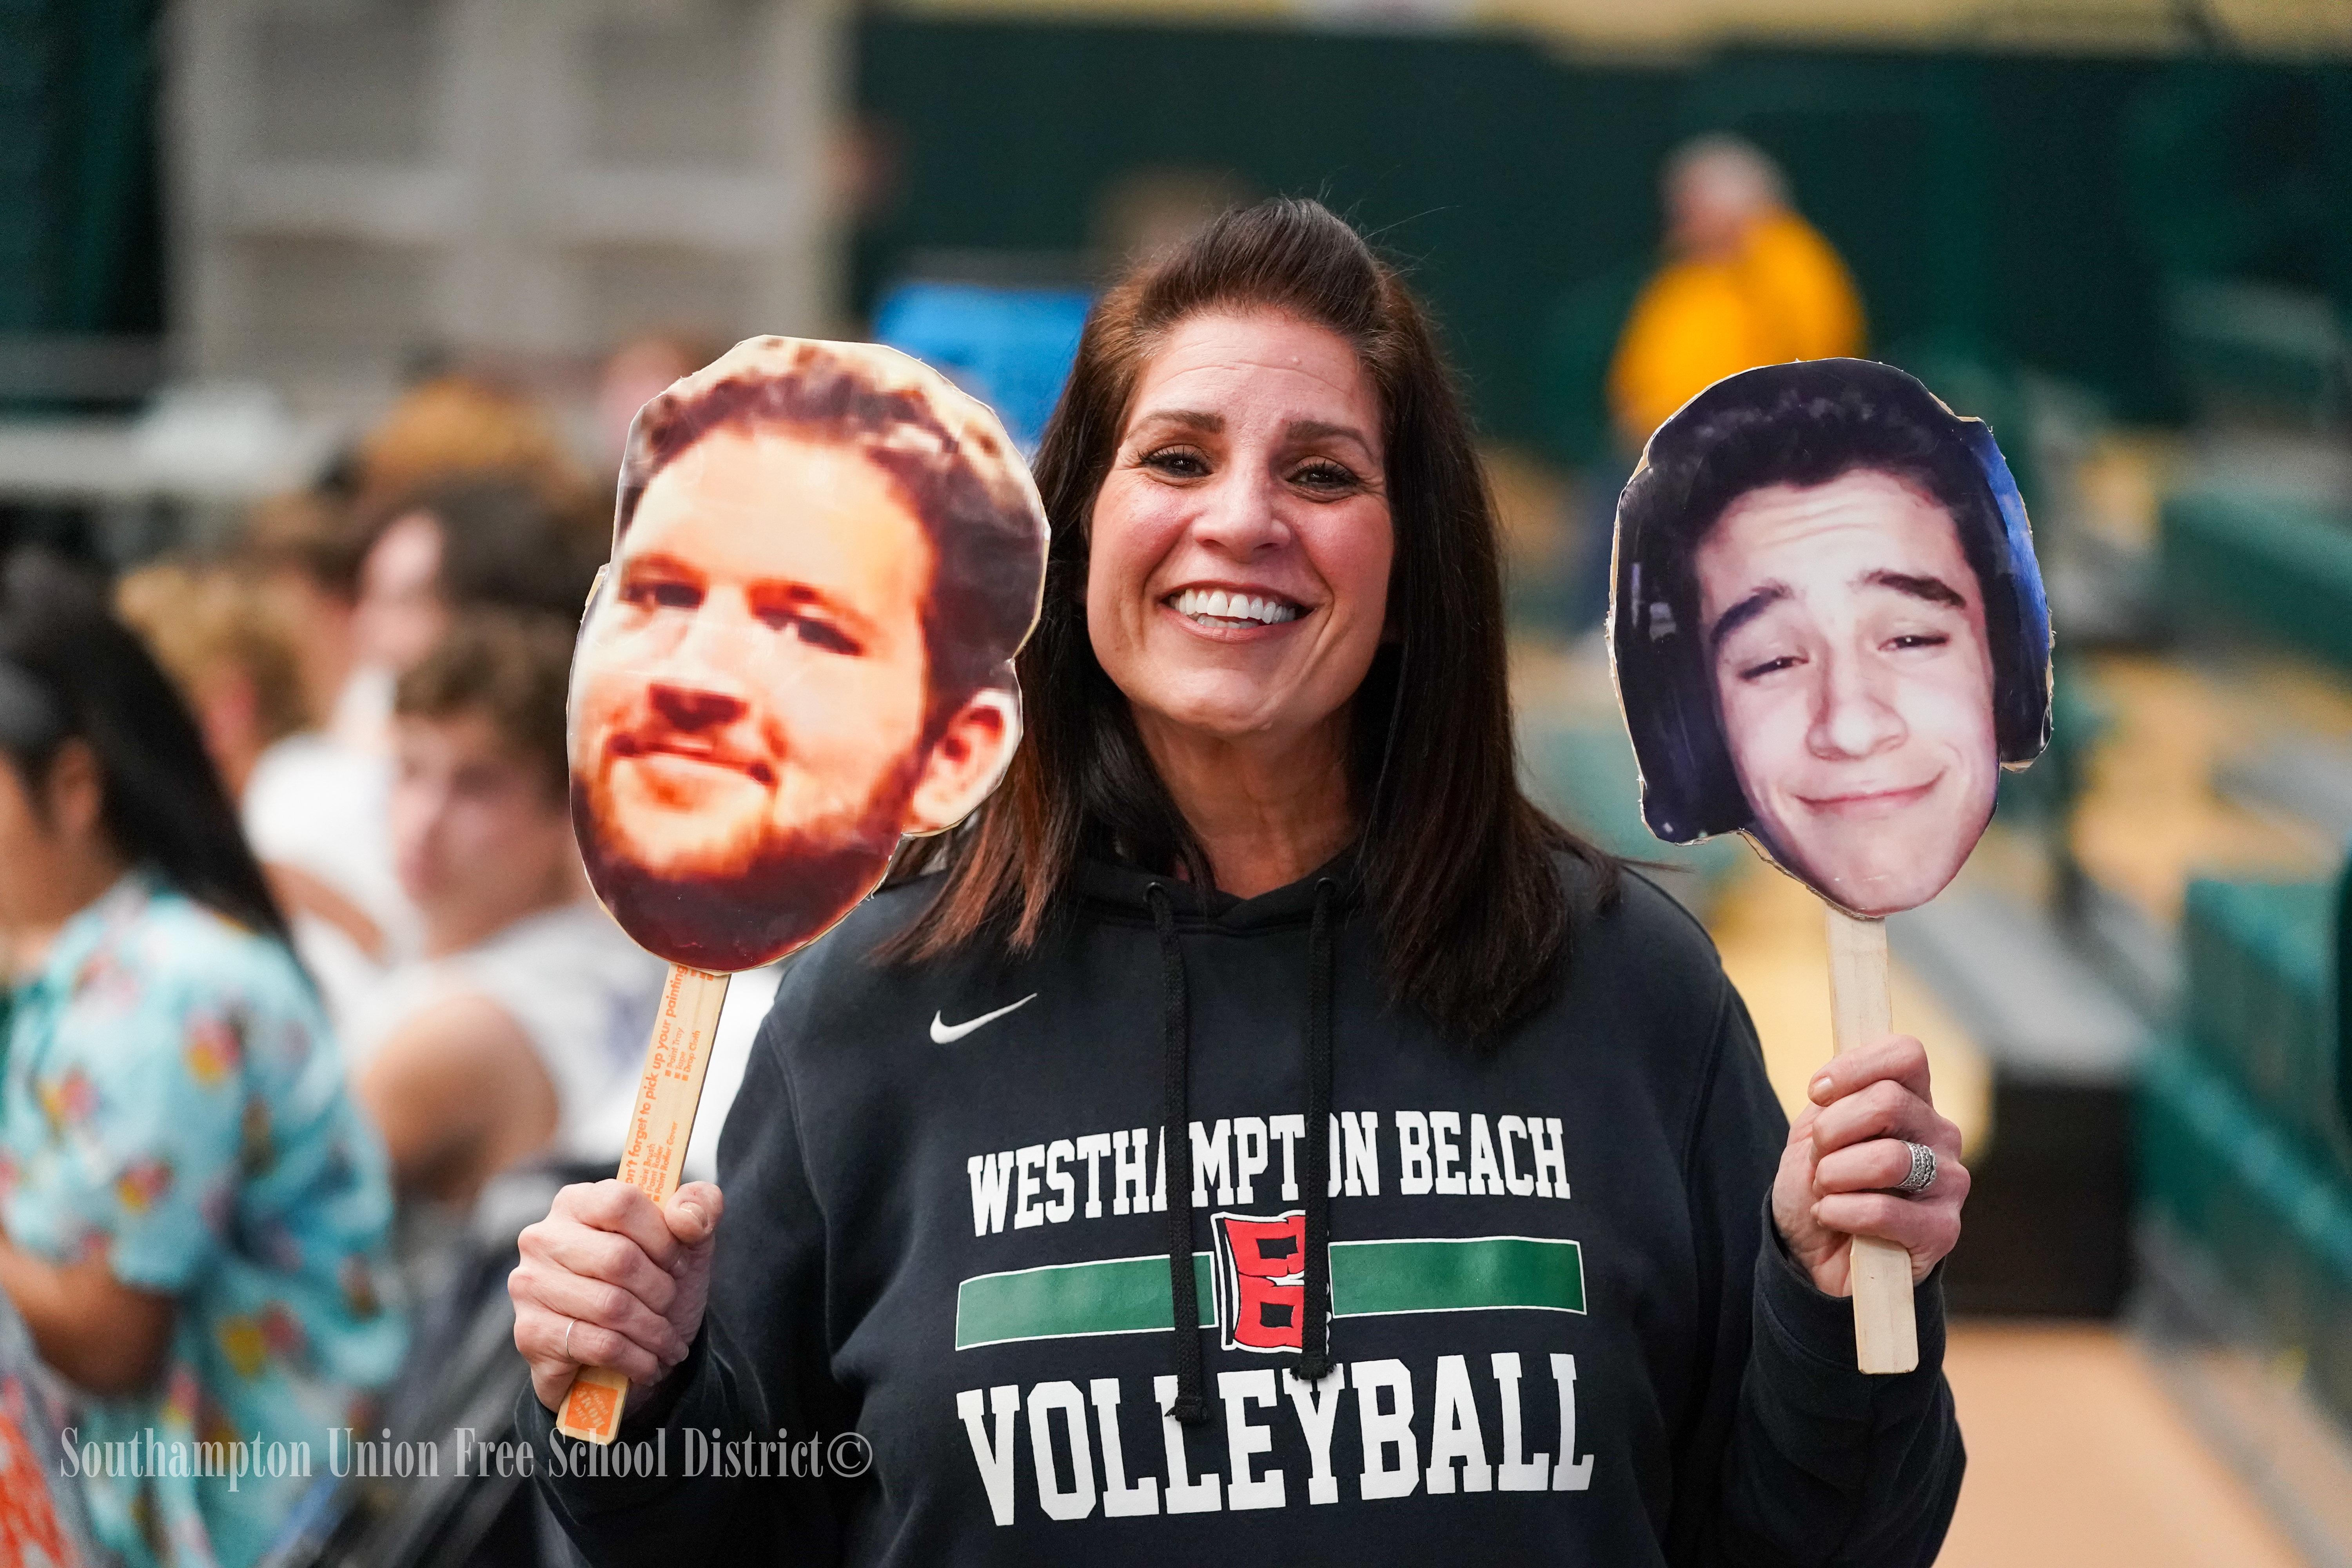 The Westhampton Beach community came out once again, this time in Farmingdale, to support its boys volleyball team.